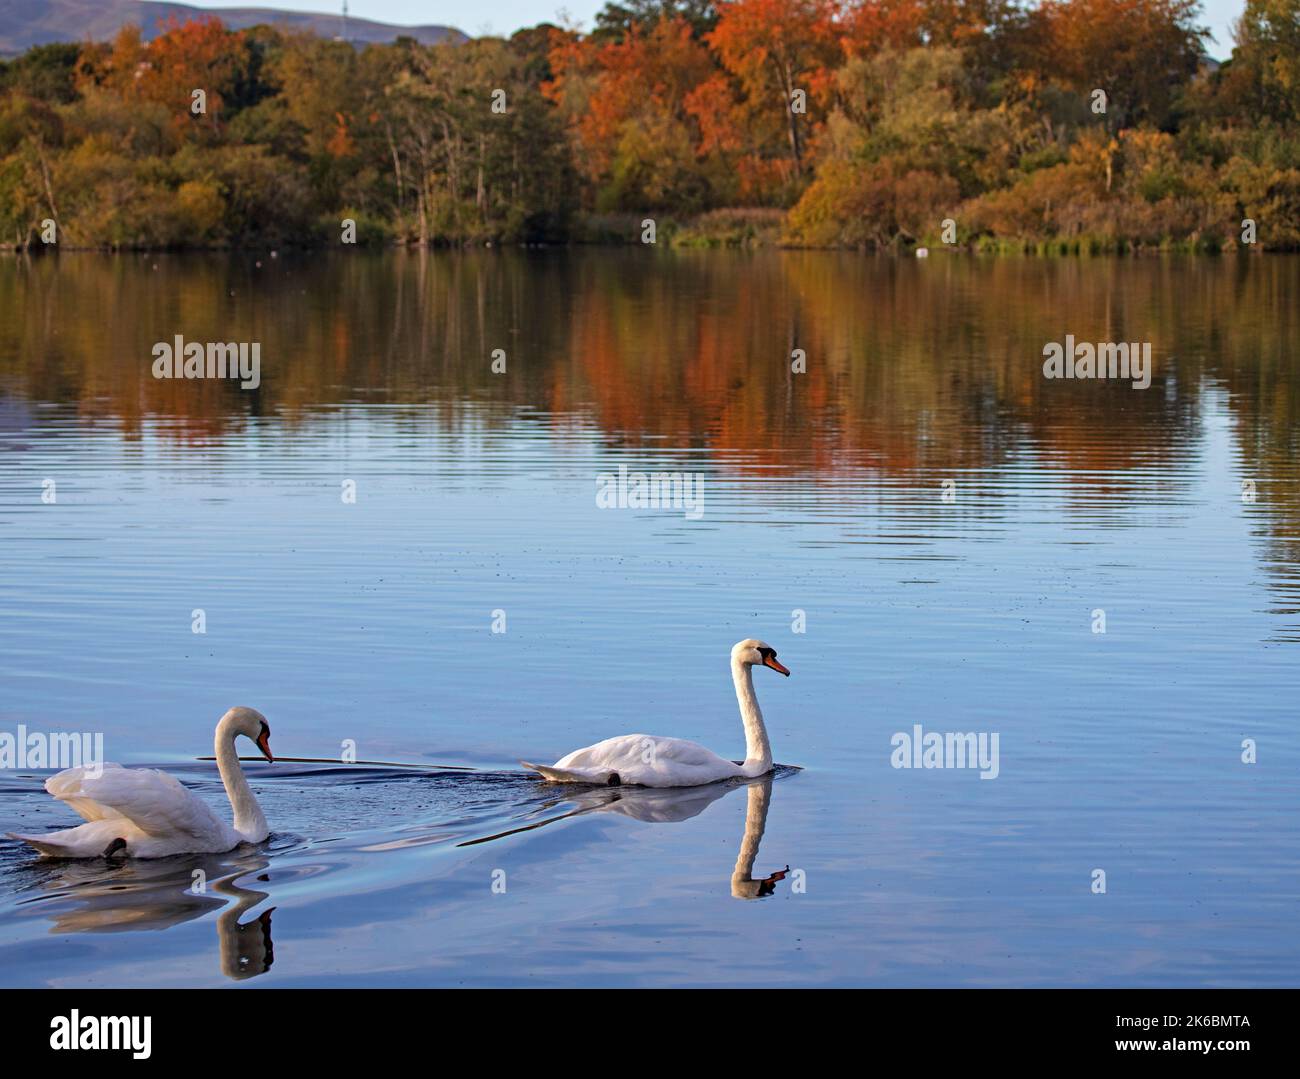 Duddingston, Edinburgh, Scotland. UK. 13th October 2022. Autumn colour foliage in the background of Duddingston Loch with Mute Swans Cygnus Olor) in foreground on a sunny cool morning which began at 4 degrees centigrade at sunrise and increased to 12  degrees by late morning.Two Mute Swans gliding into the autumnal scene. Credit: Arch White/alamy live news Stock Photo